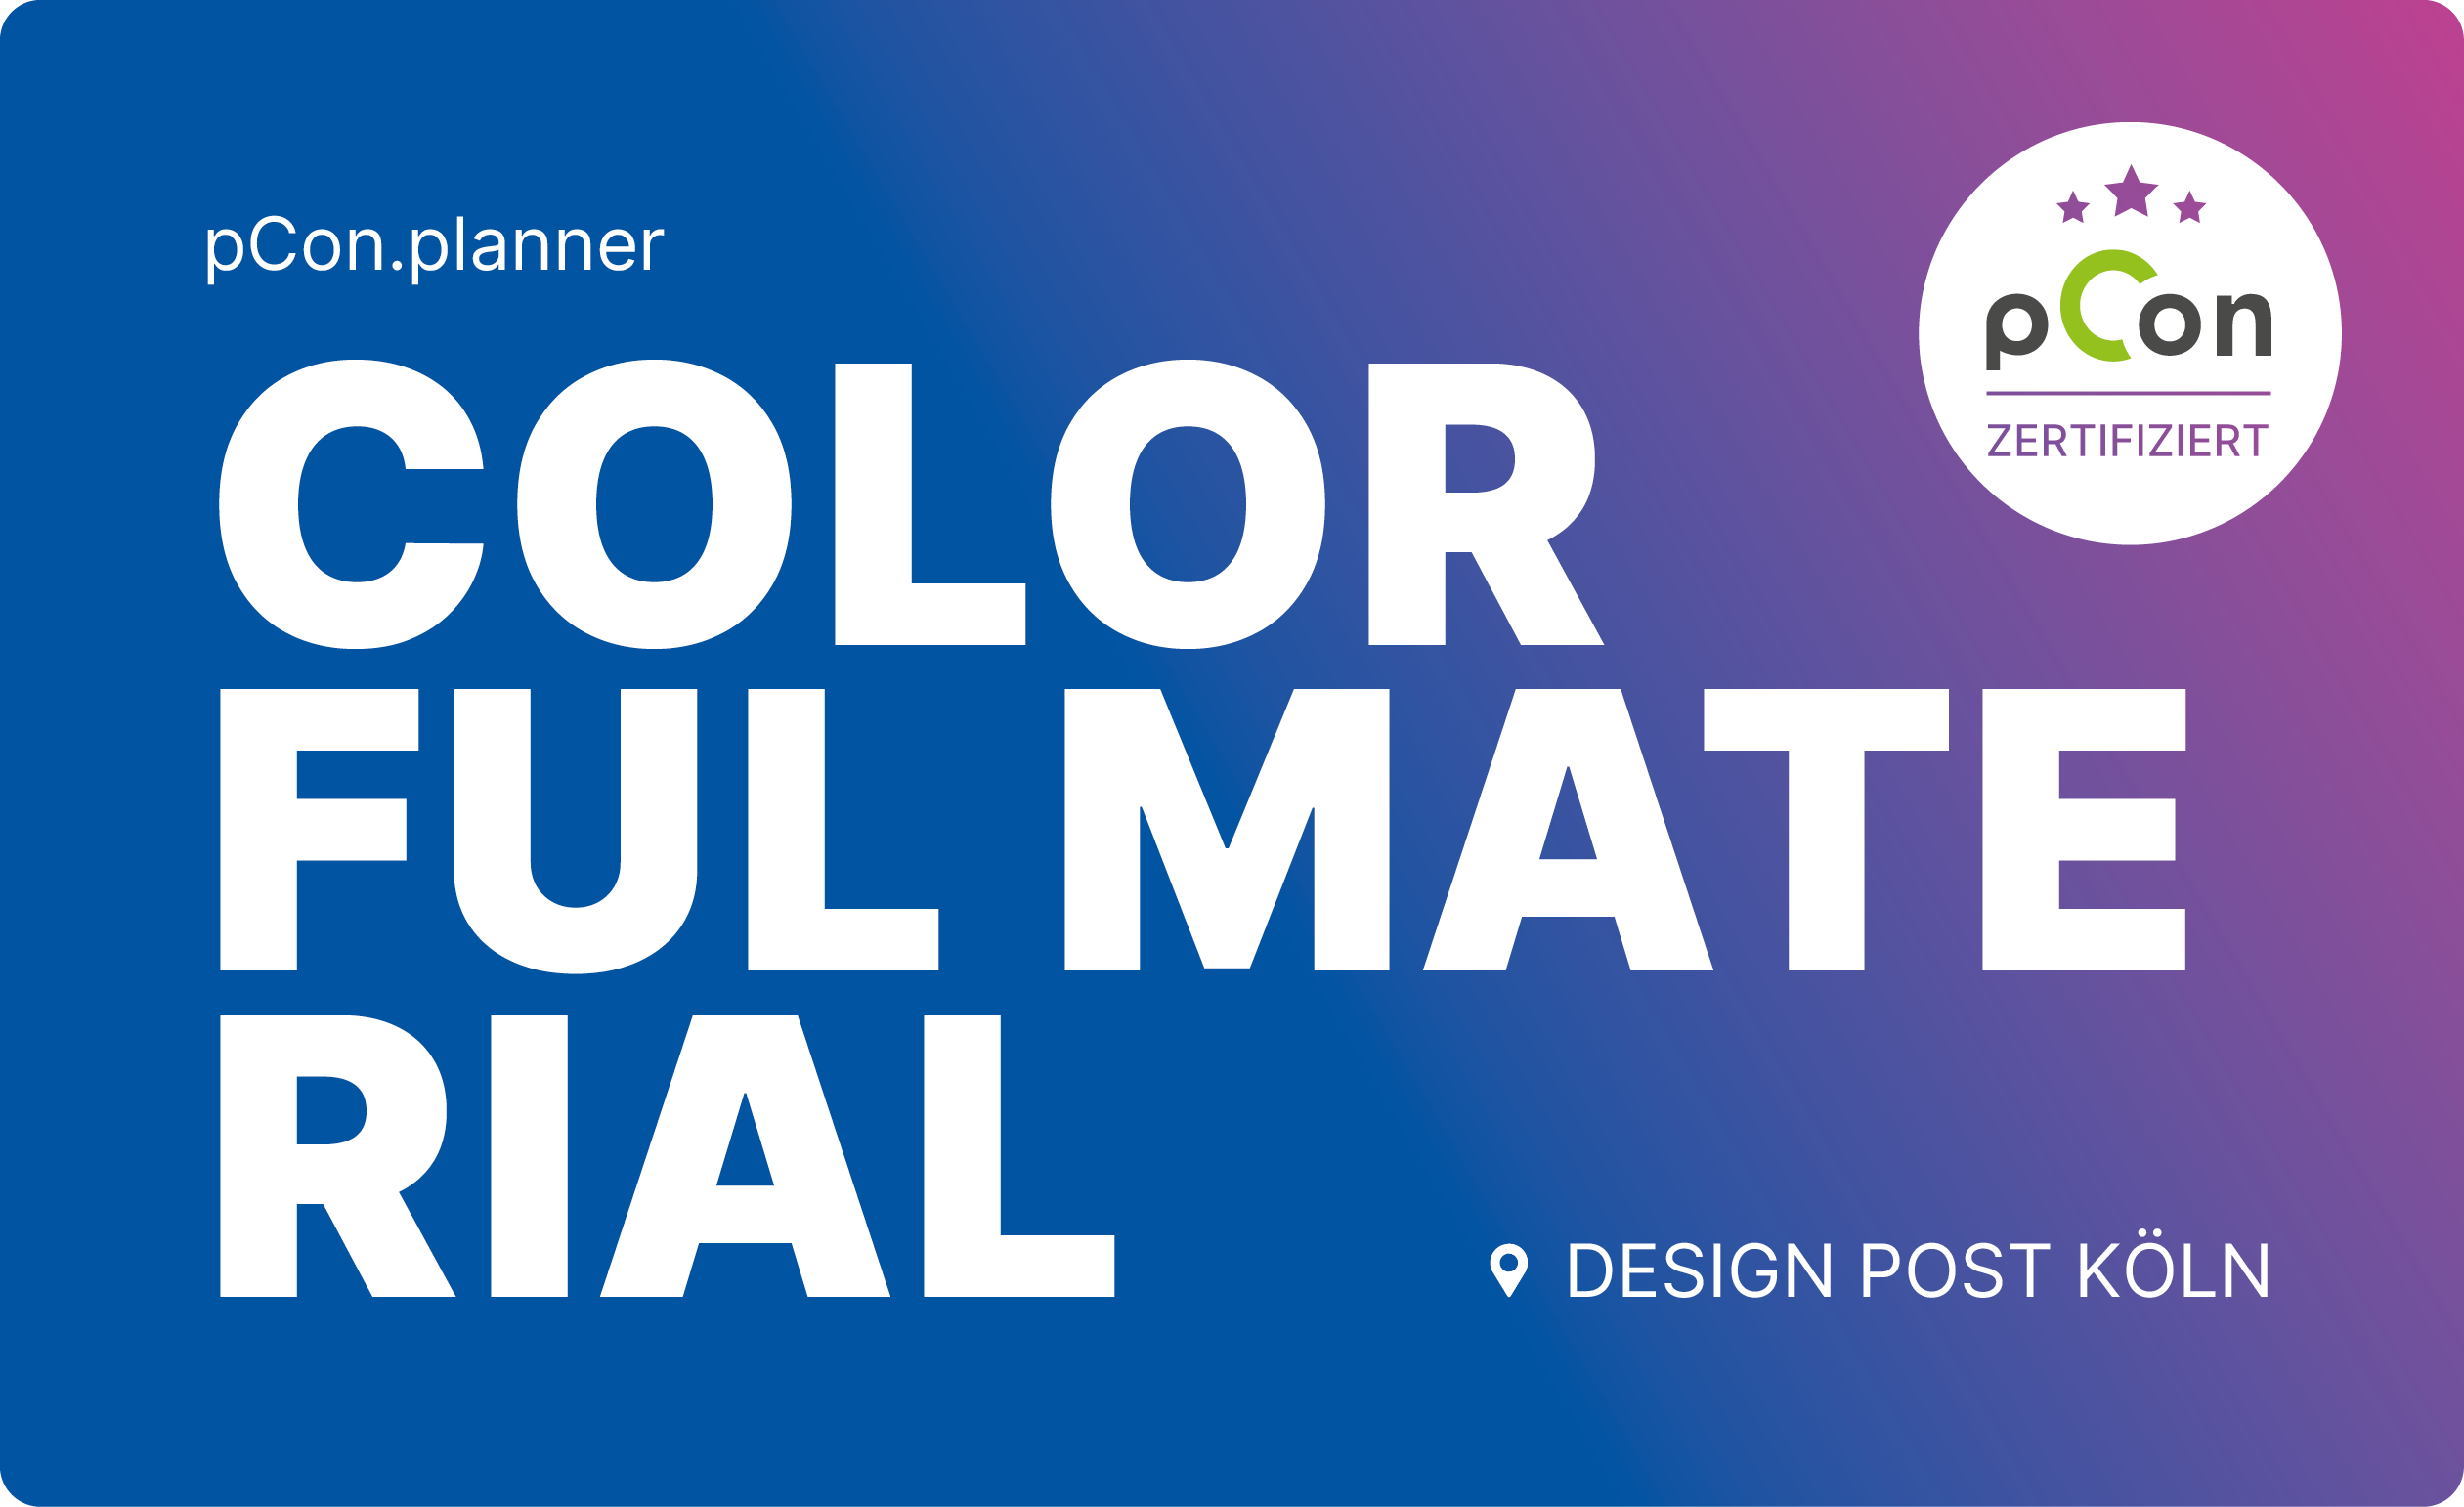 pCon.planner – Colorful Material